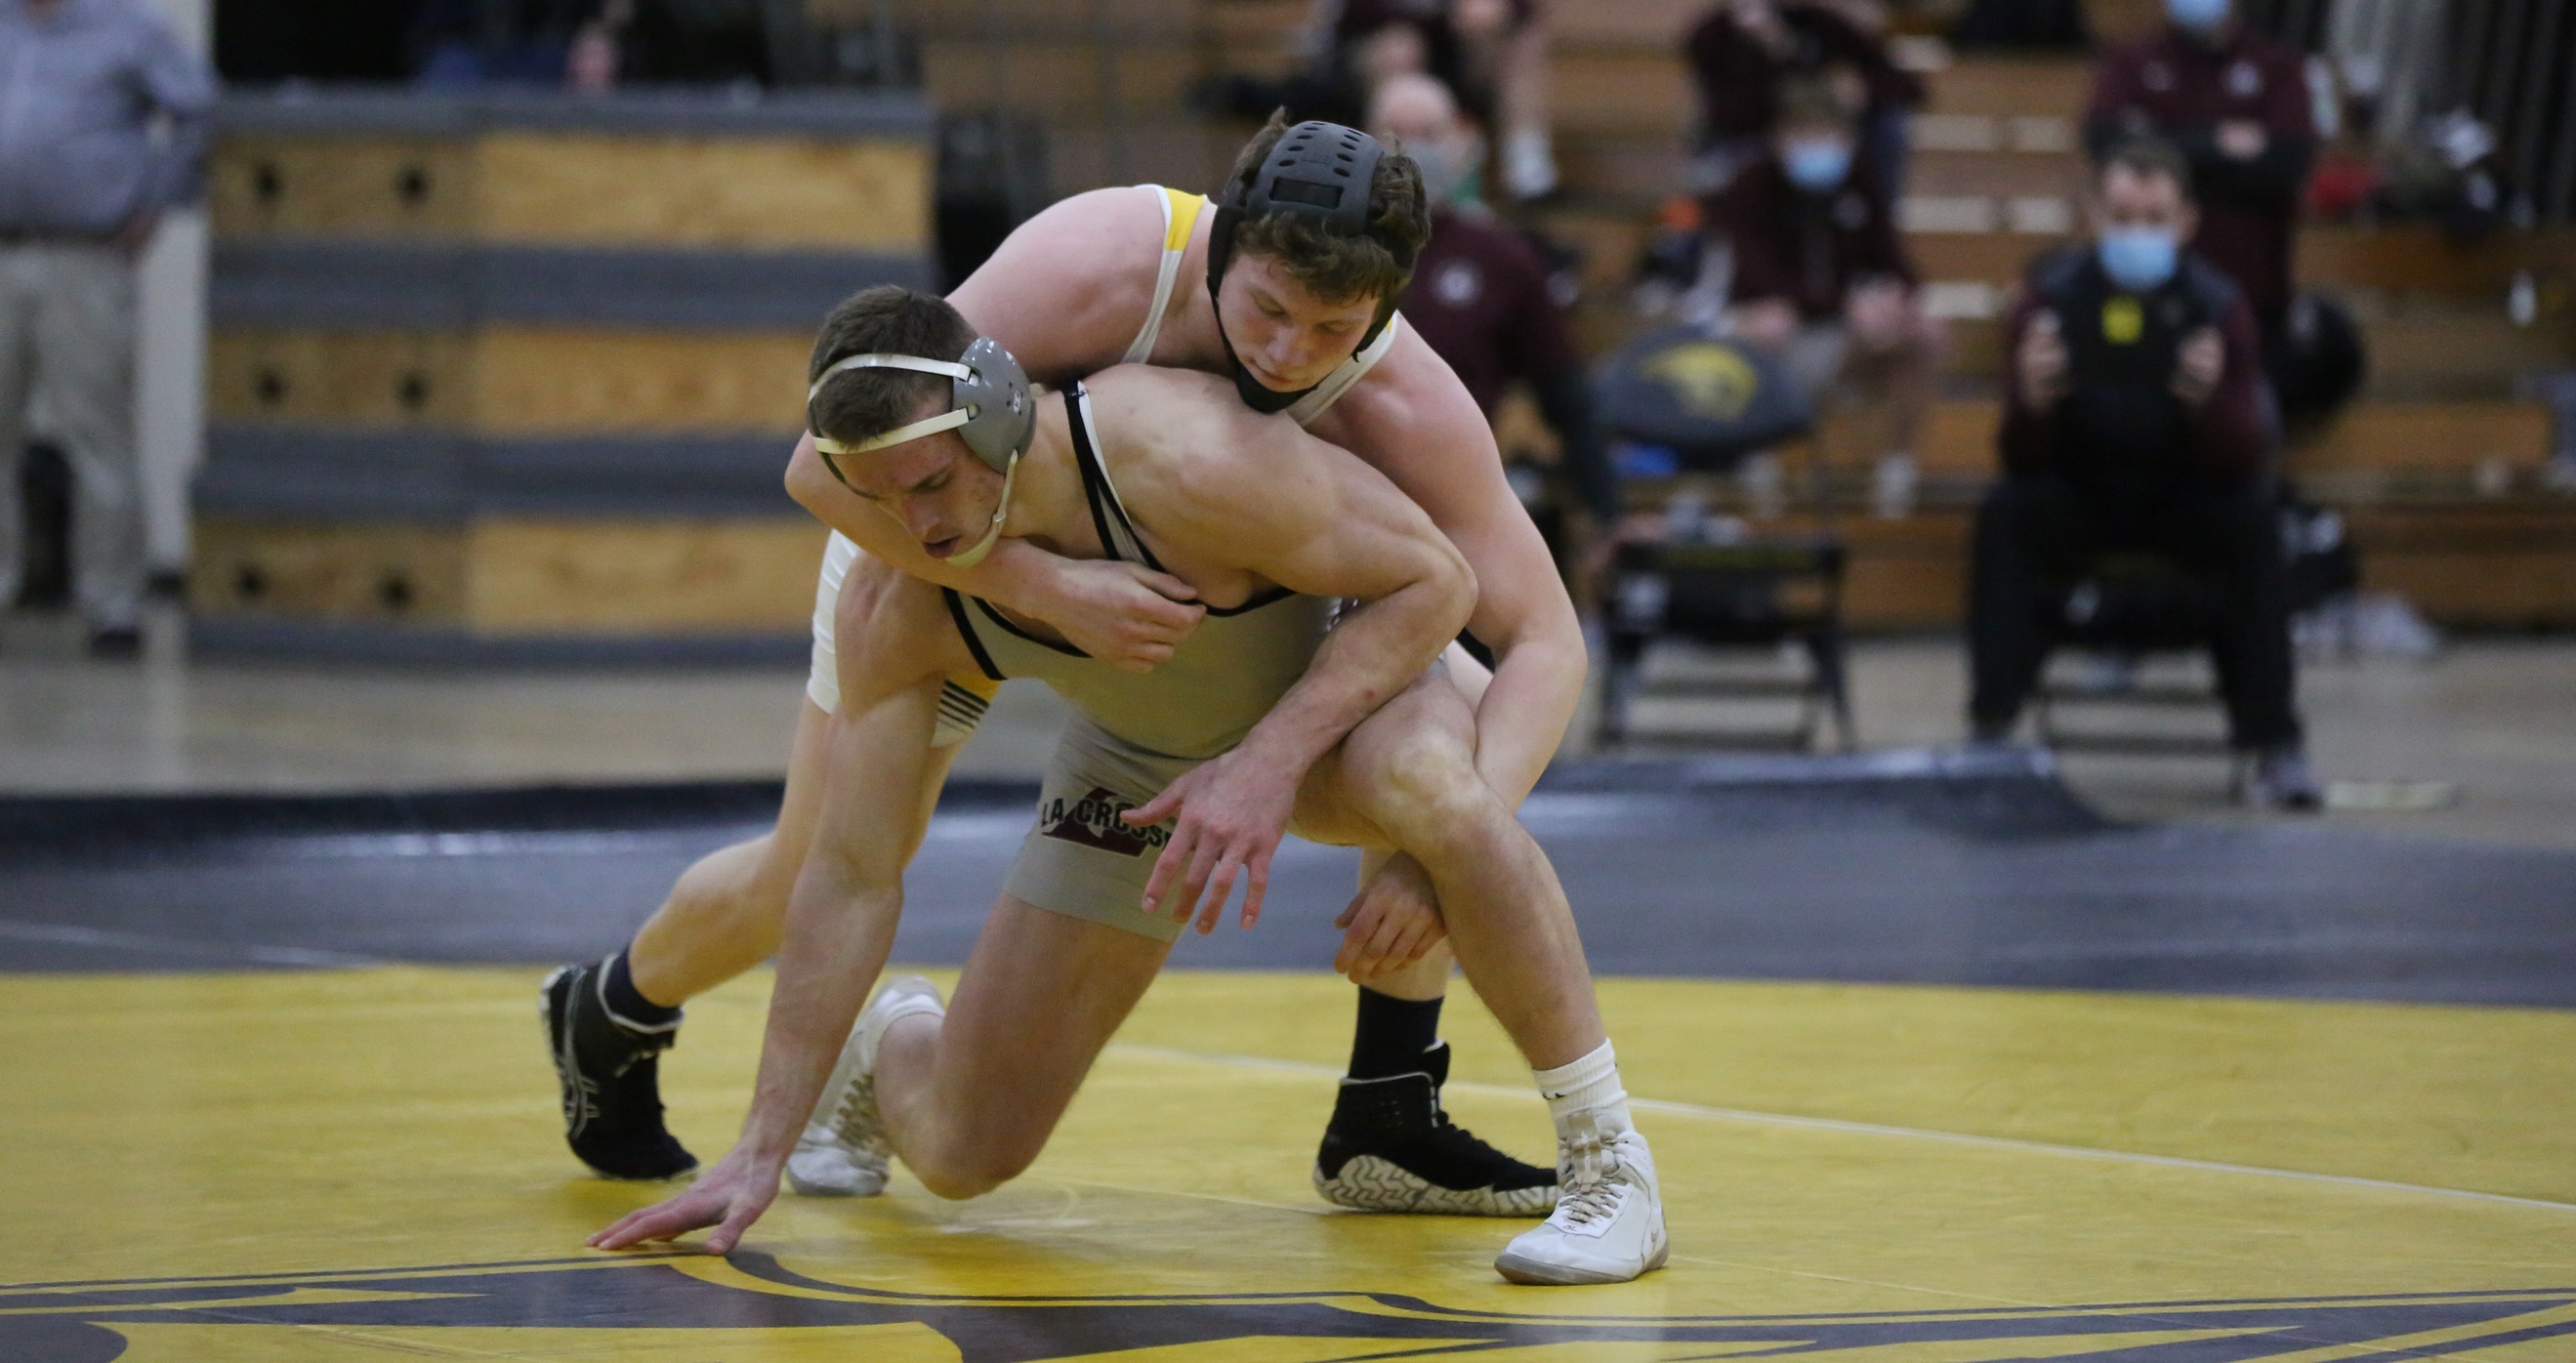 Beau Yineman won by fall over UW-La Crosse's Isaac Lahr, the NCAA Division III's top-ranked 197-pound wrestler.